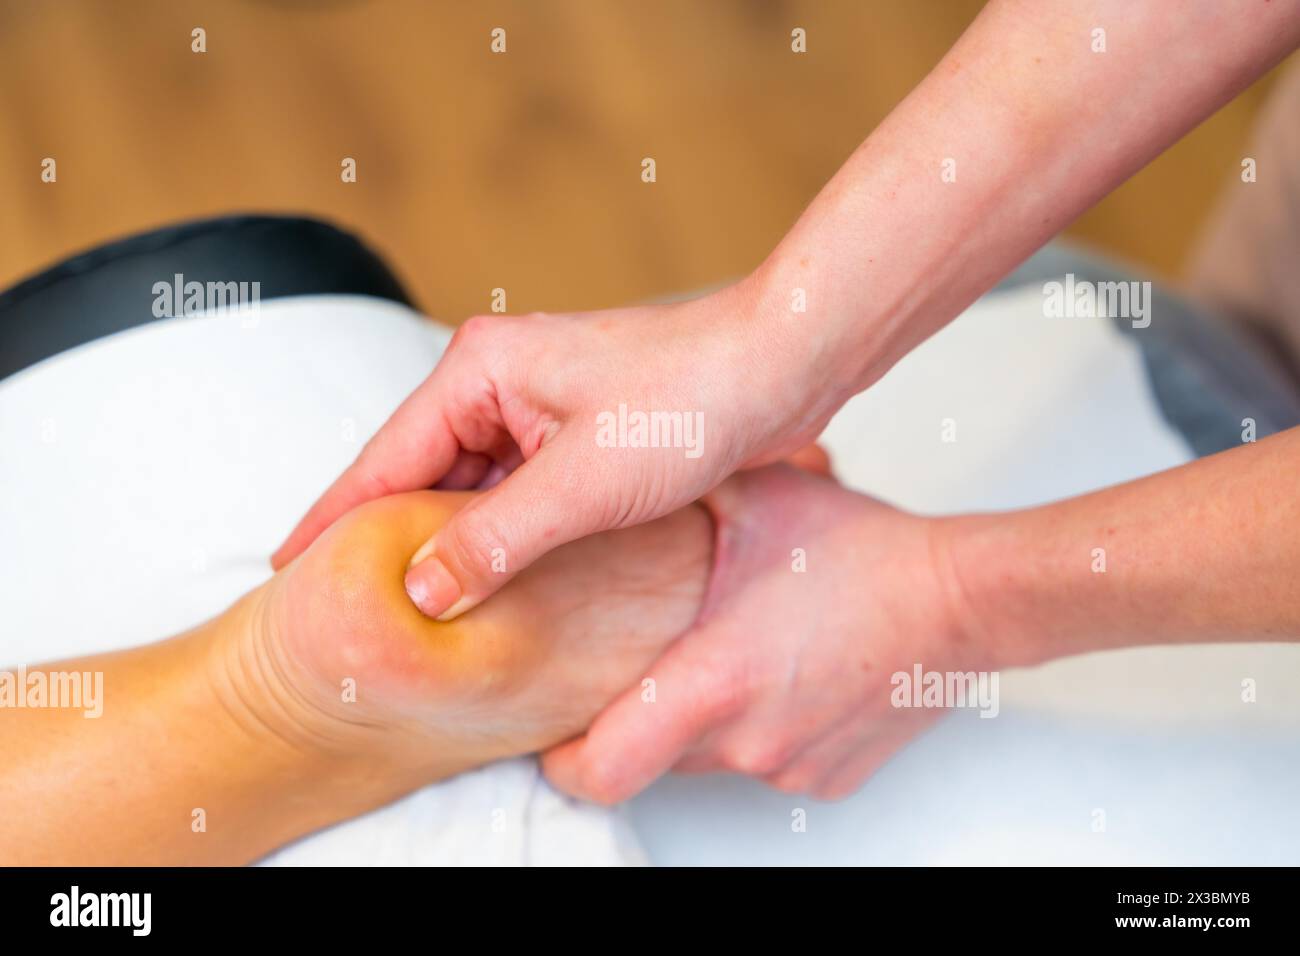 Close-up of the hands of a professional massage therapist giving a reflexology foot massage to a patient Stock Photo